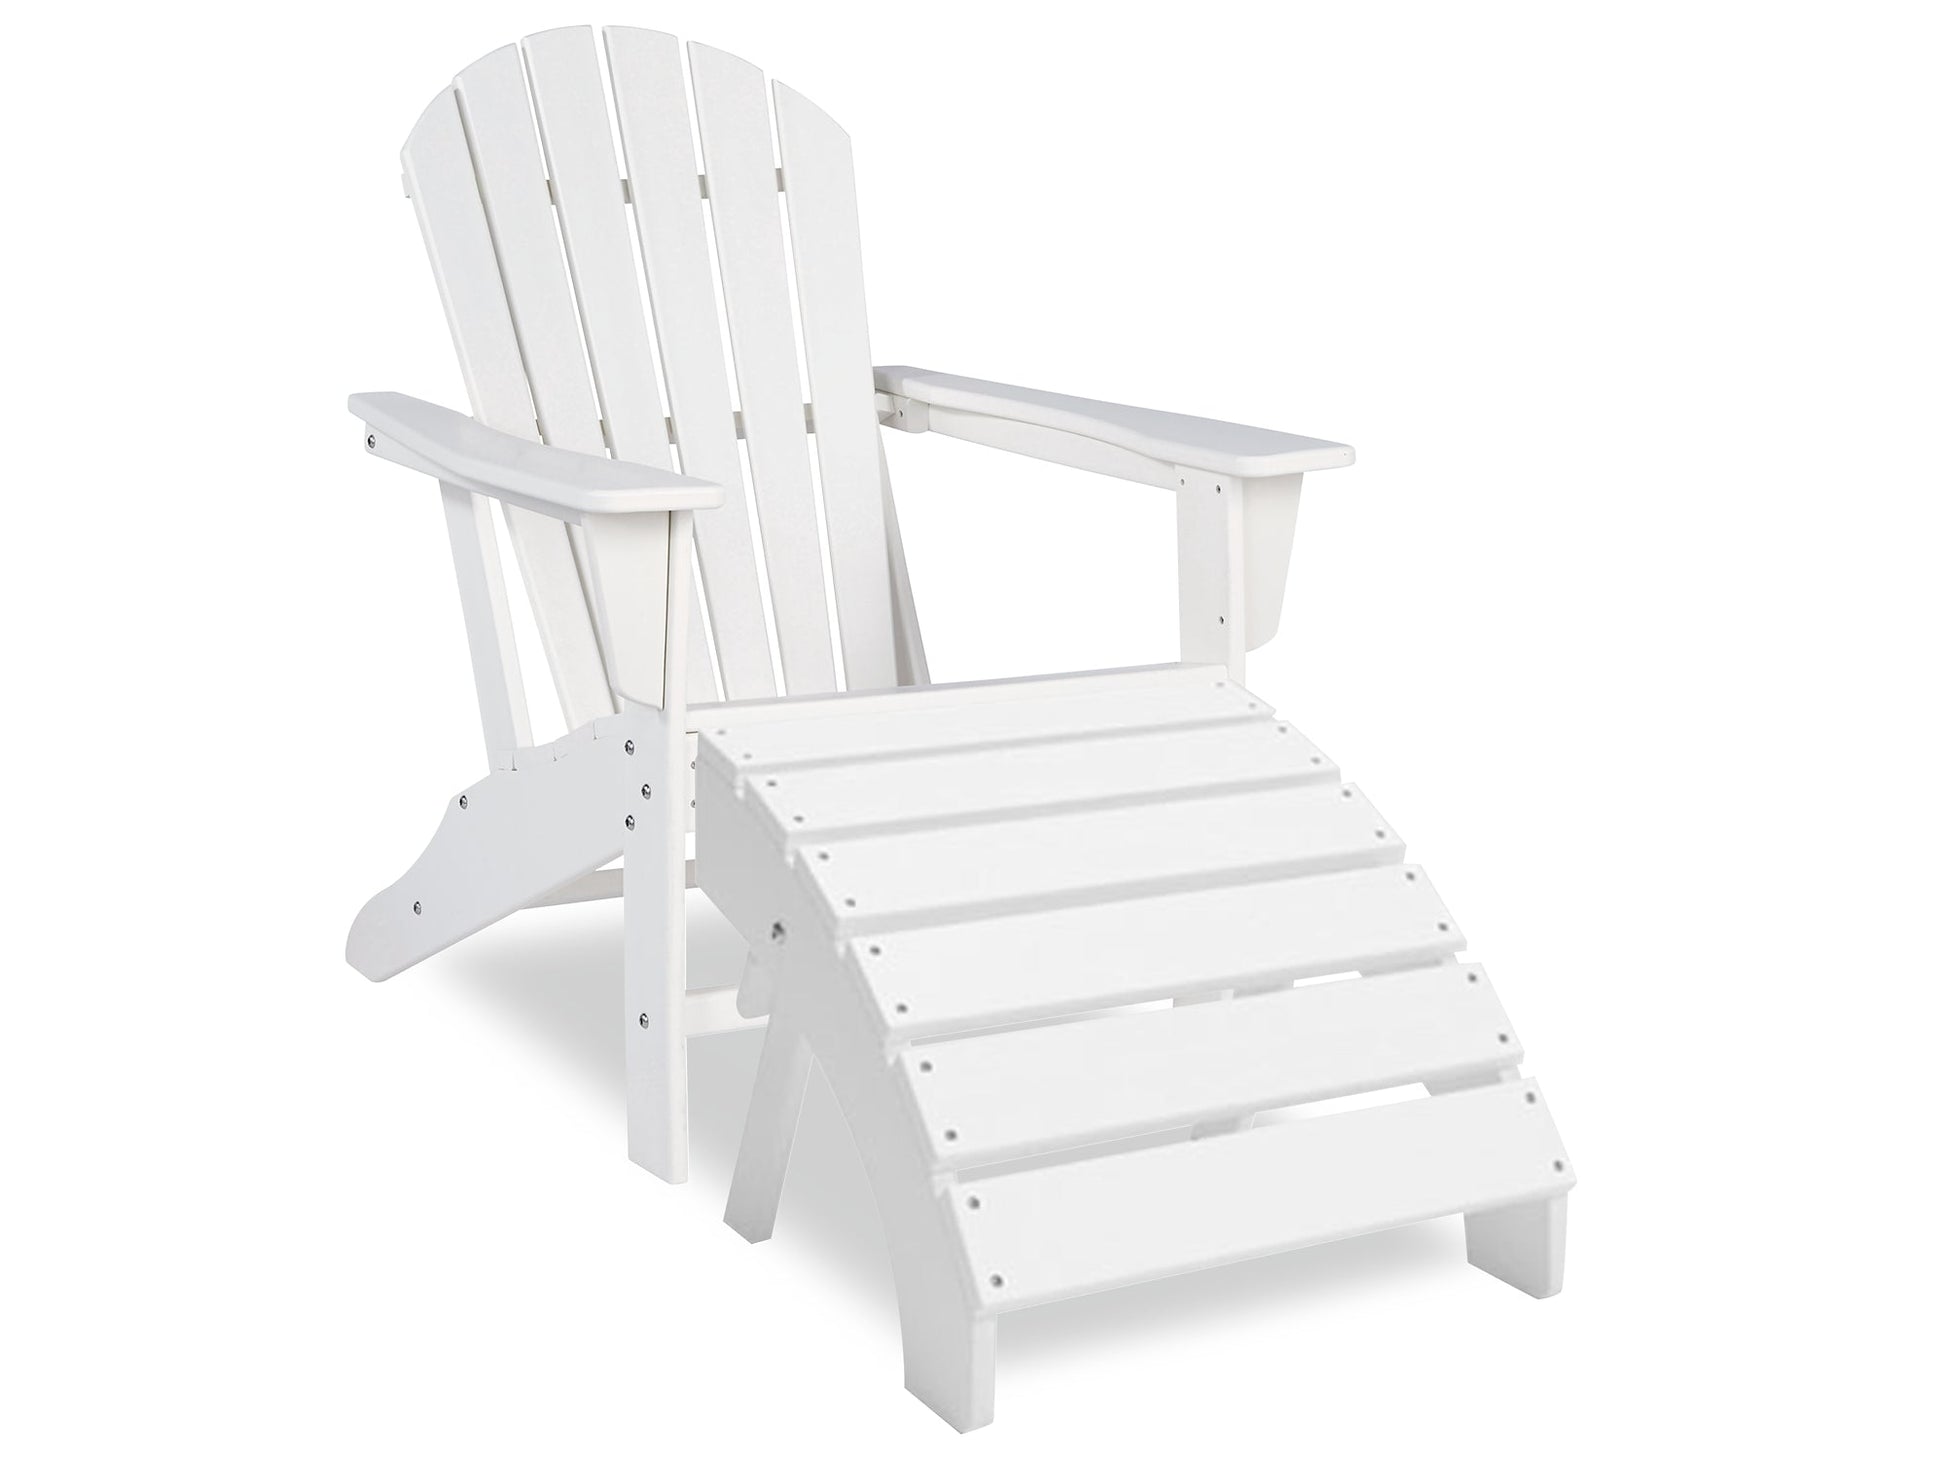 Sundown Treasure Outdoor Adirondack Chair and Ottoman at Walker Mattress and Furniture Locations in Cedar Park and Belton TX.